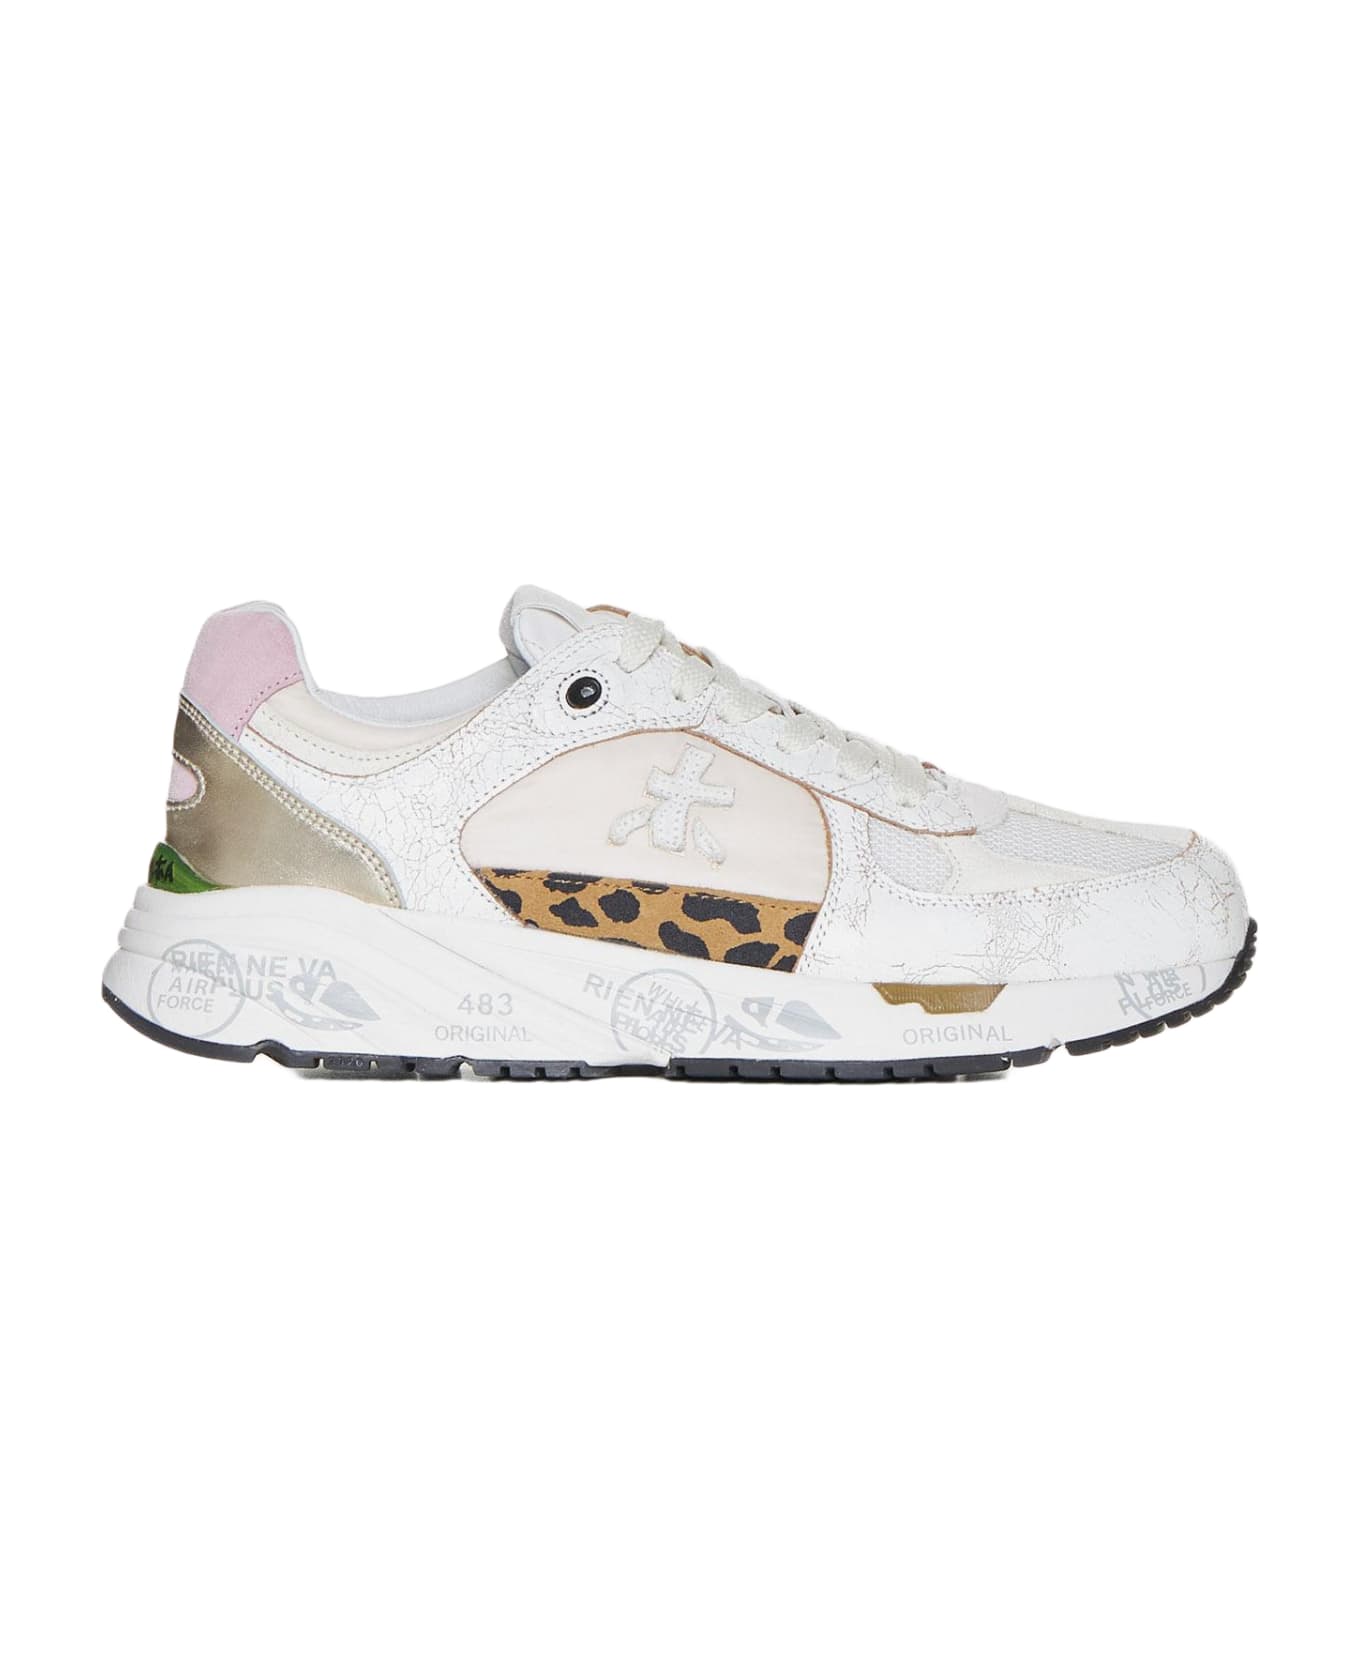 Premiata Mased Leather, Suede And Nylon Sneakers - Offwhite